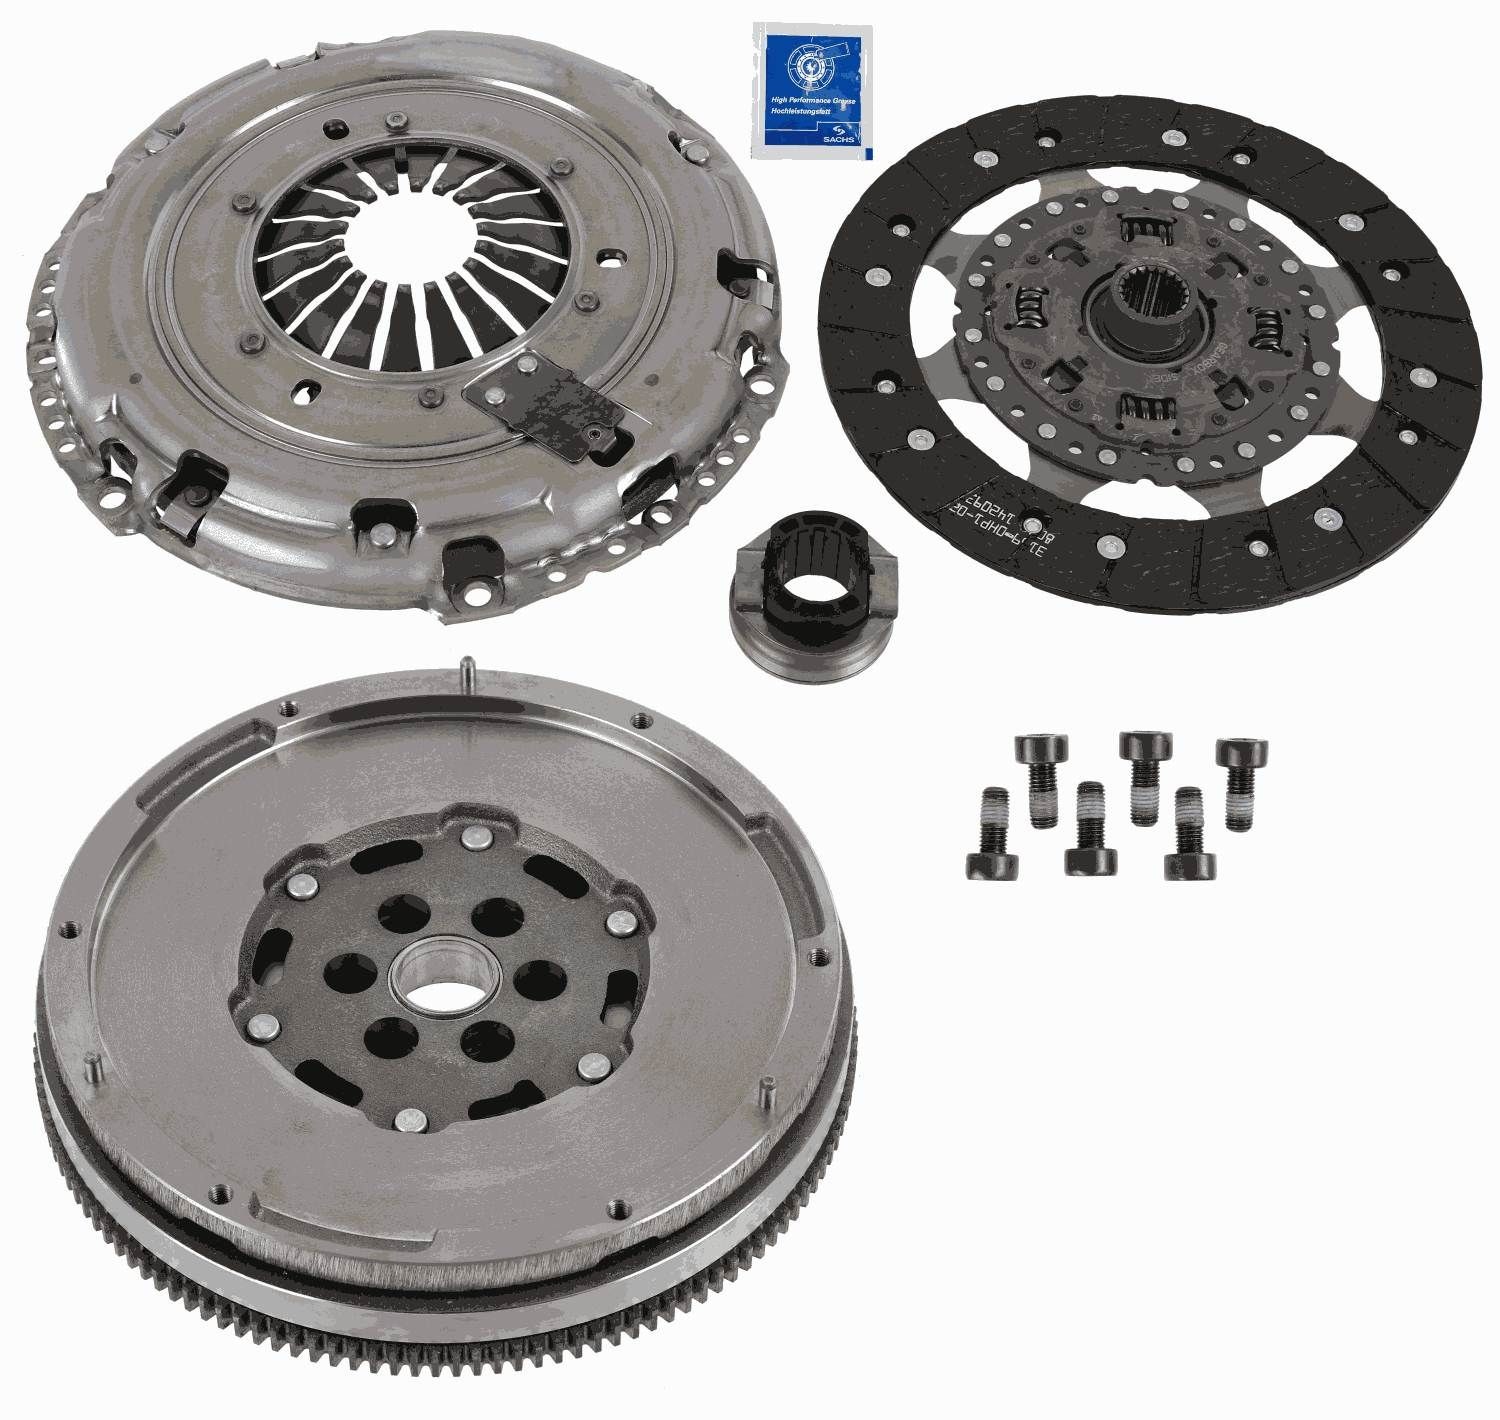 2290 601 128 SACHS Clutch set OPEL with clutch pressure plate, with dual-mass flywheel, with flywheel screws, with clutch disc, with clutch release bearing, 240mm